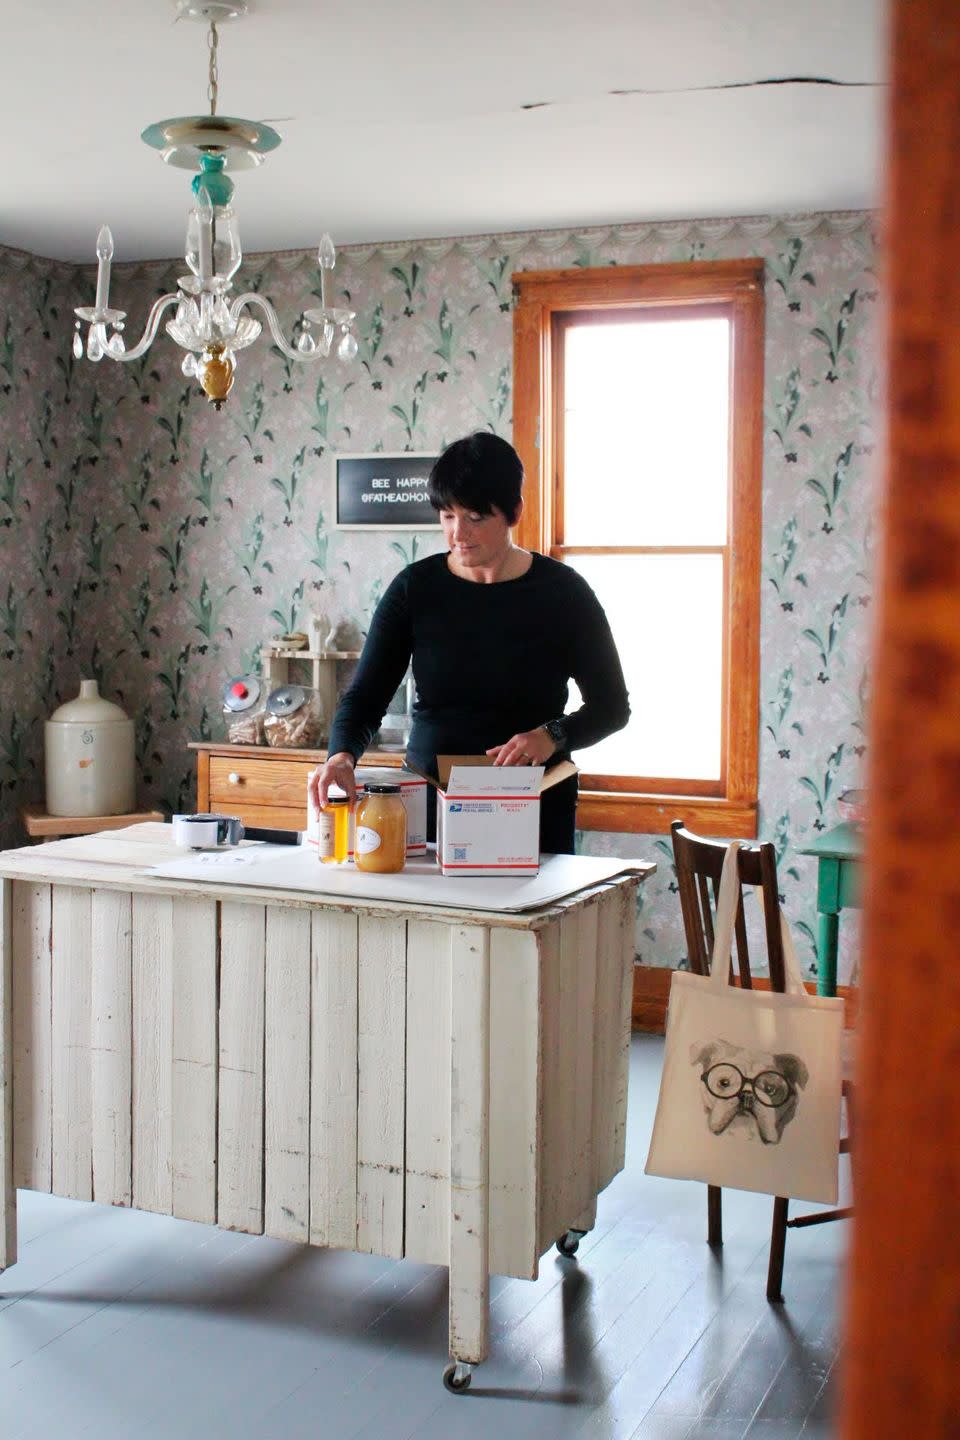 kathy suchan, packing honey in her shipping room